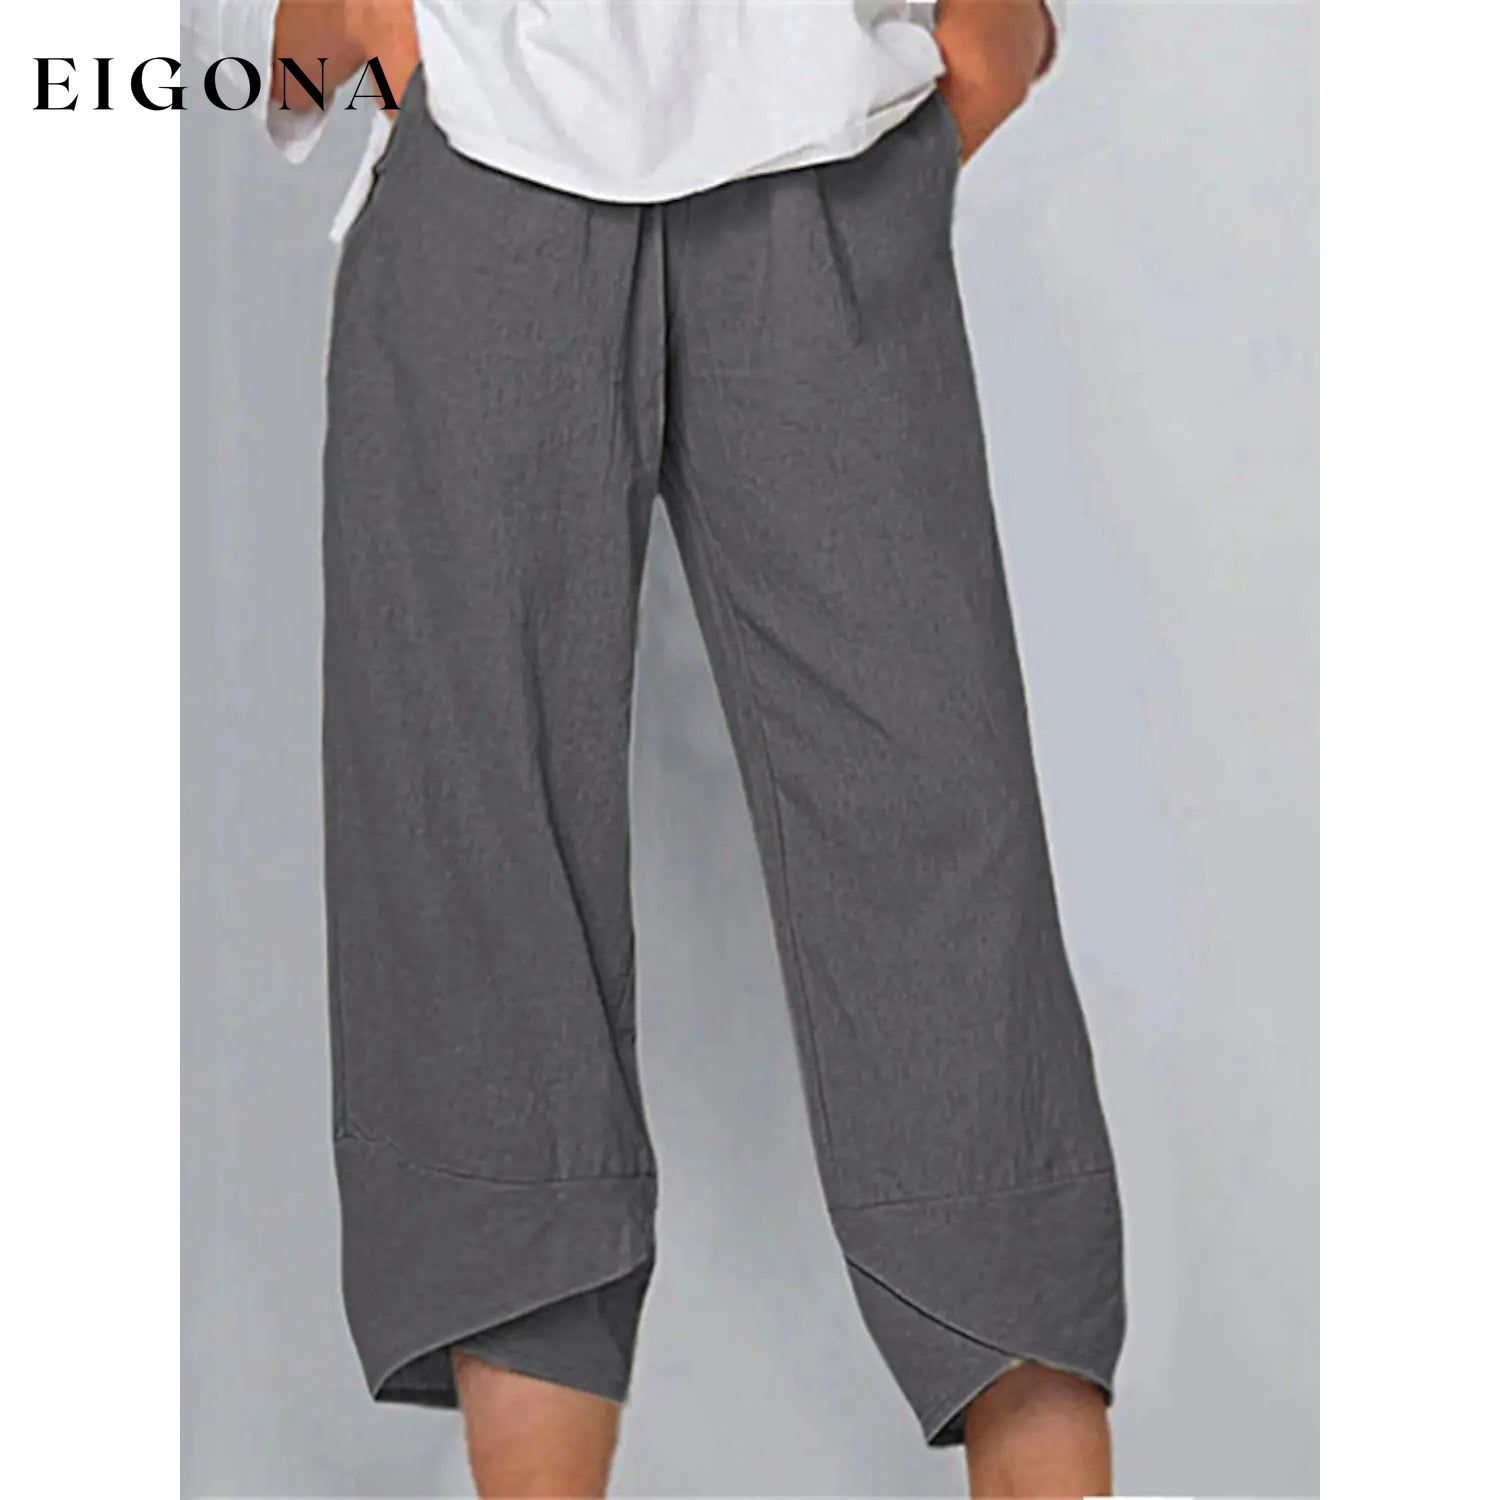 Women's Casual Plus Size Cotton Pants Gray __stock:200 bottoms refund_fee:1200